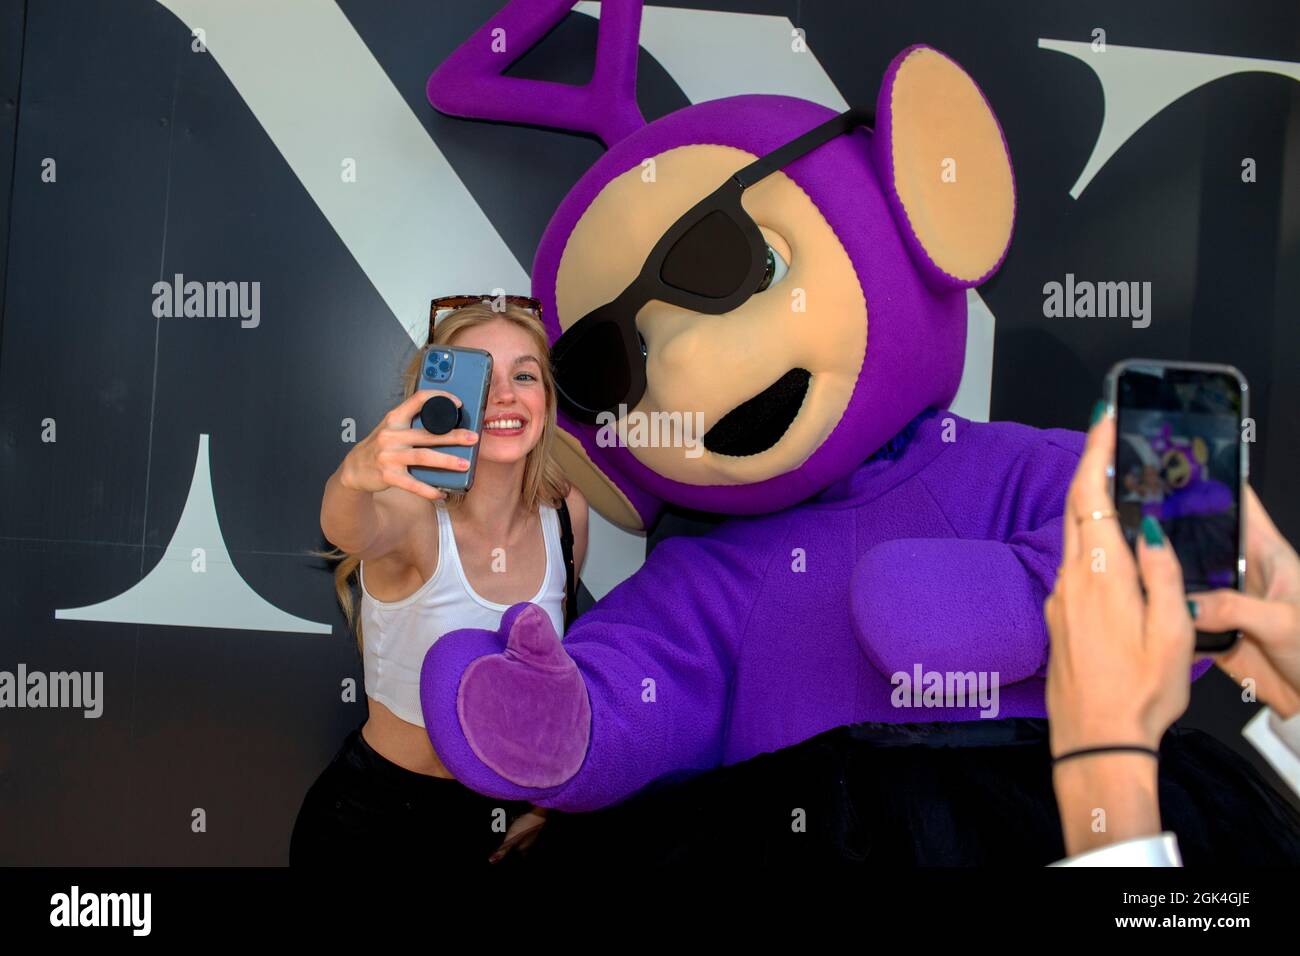 New York, NY, USA. 10th Sep, 2021. Tinky Winky the Teletubby outside Spring Studios in New York, Sept. 10, 2021. The Council of Fashion Designers of America live shows will run through Sept. 12, after two seasons of digital presentations. There are plans to hold 91 runway shows from American and international designers. Everybody entering the venue is required to show proof of COVID-19 vaccination. (Credit Image: © John Marshall Mantel/ZUMA Press Wire) Stock Photo